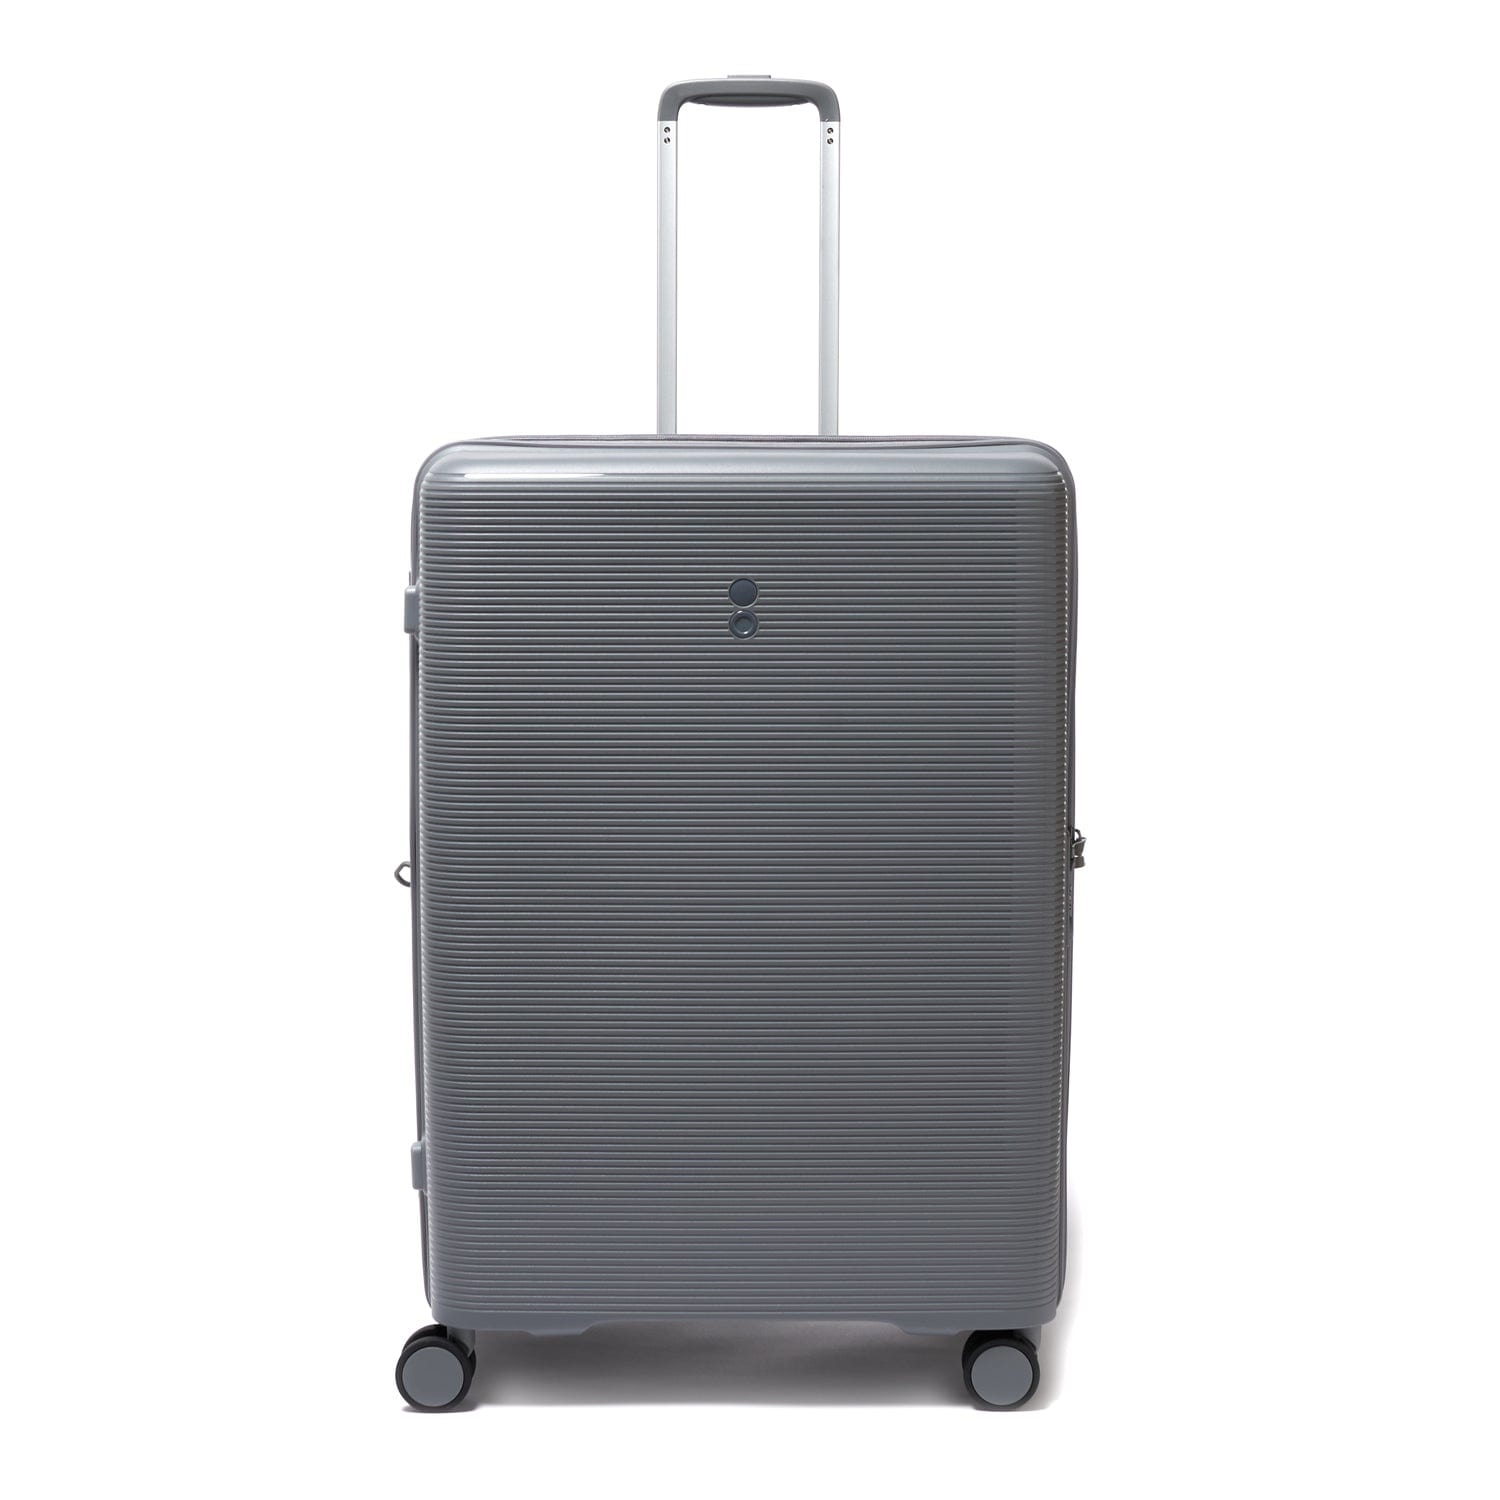 Echolac Forza 75cm Hardcase Expandable 4 Double Wheel Cabin Luggage Trolley Gray - PW005 28 Arctic Grey